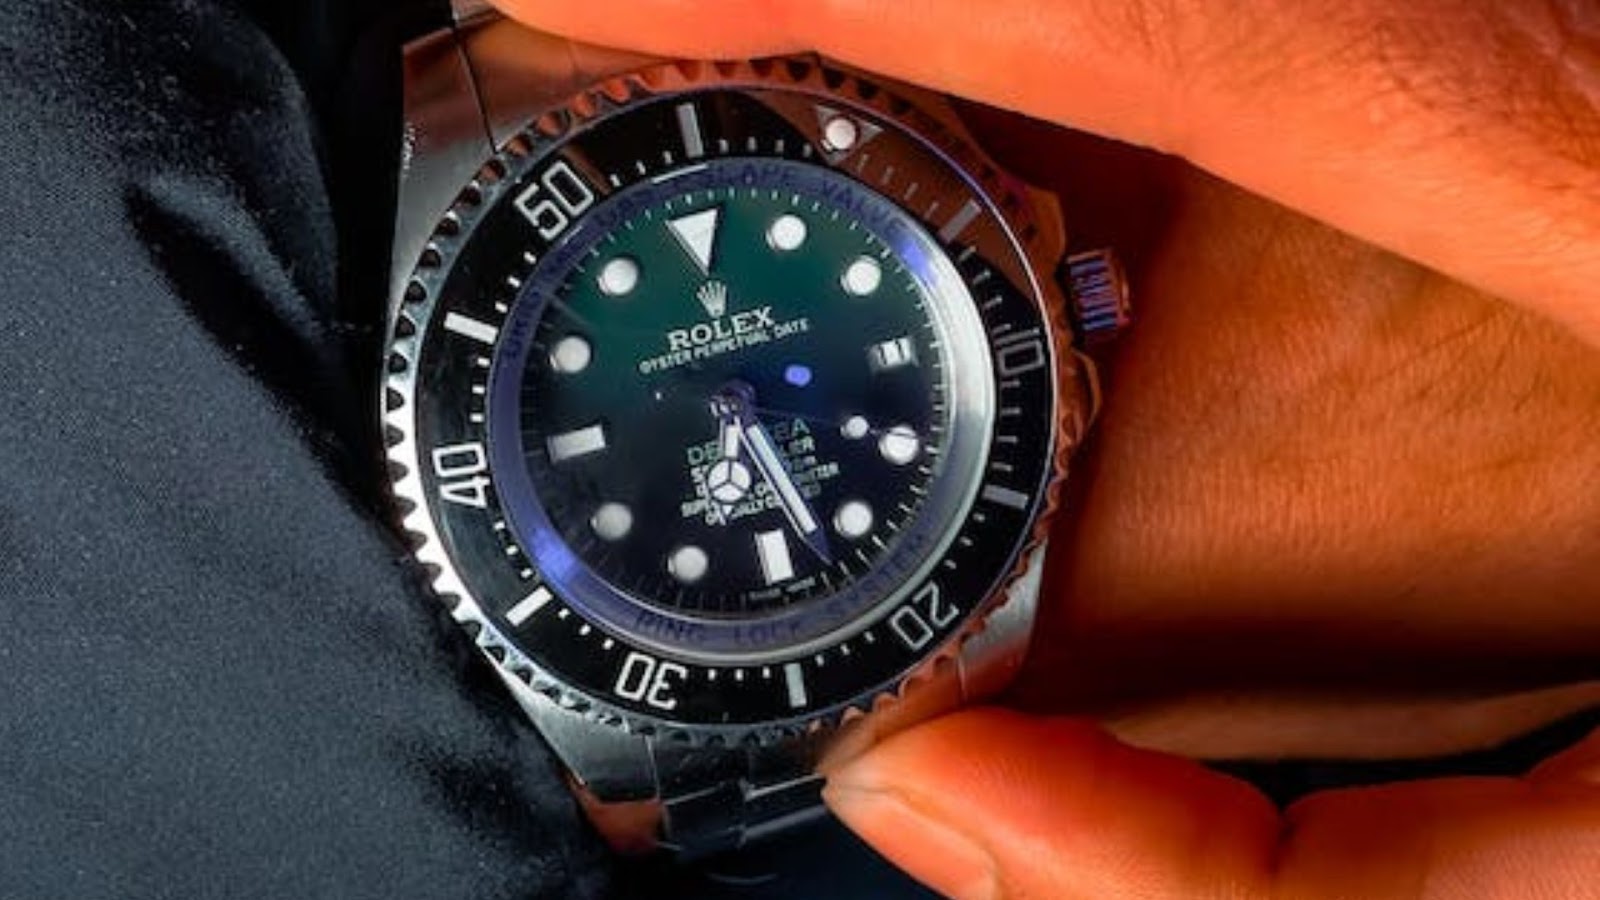 Will Rolex Service A Watch Without Papers?